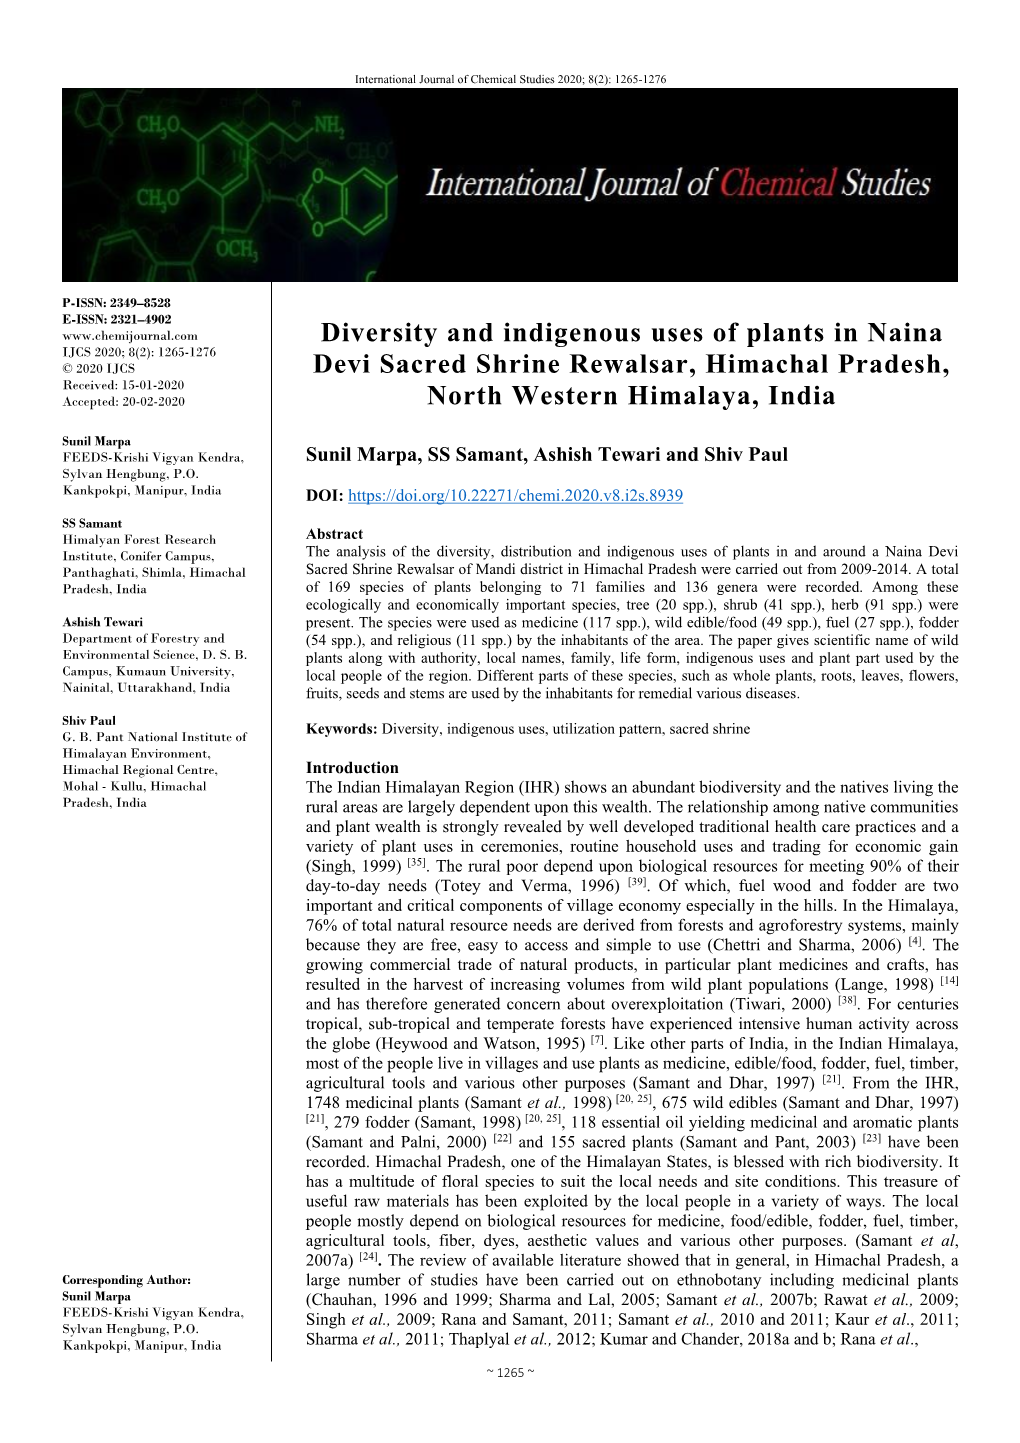 Diversity and Indigenous Uses of Plants in Naina Devi Sacred Shrine